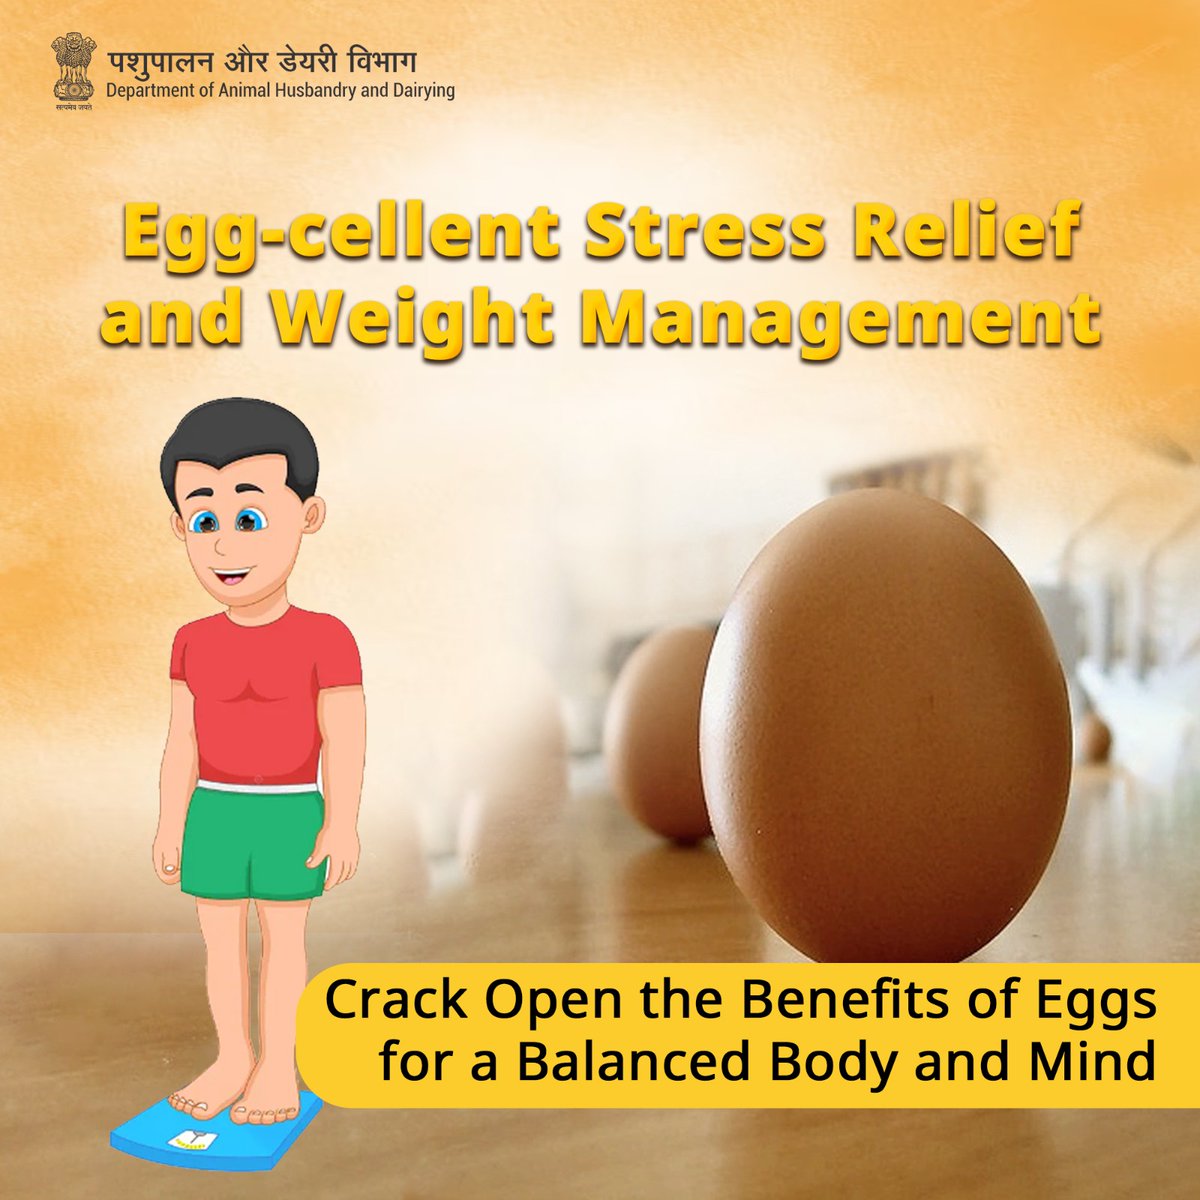 Need stress relief and weight management?
Crack open the benefits of eggs for a balanced body and mind!
#EggBenefits #WeightManagement #HealthyLiving #BalancedNutrition